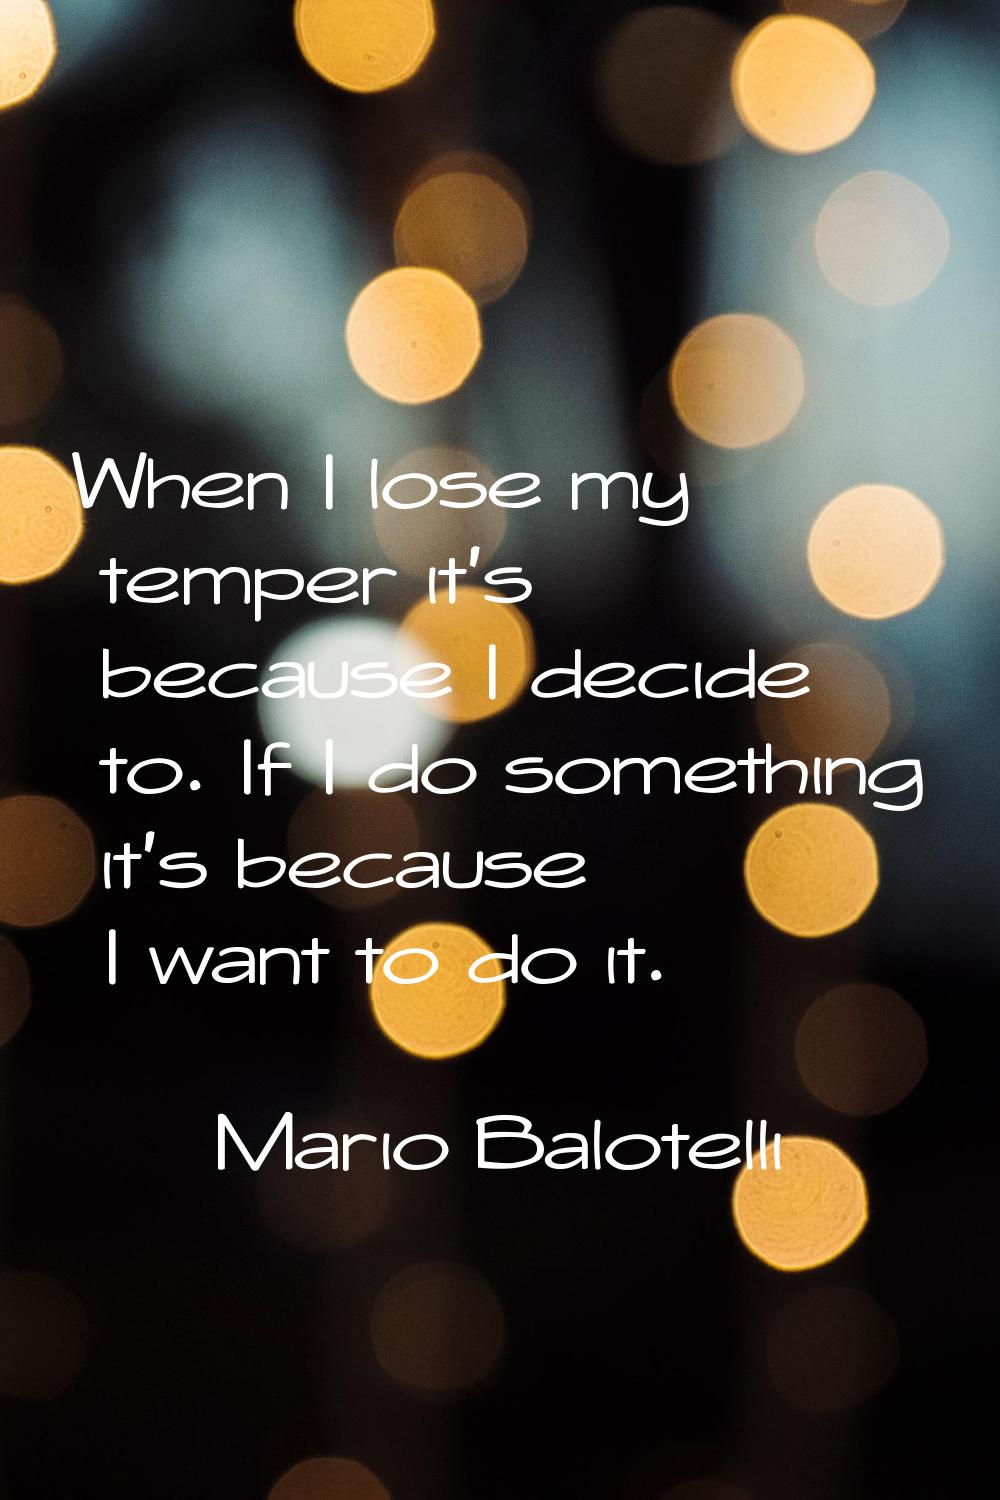 When I lose my temper it's because I decide to. If I do something it's because I want to do it.